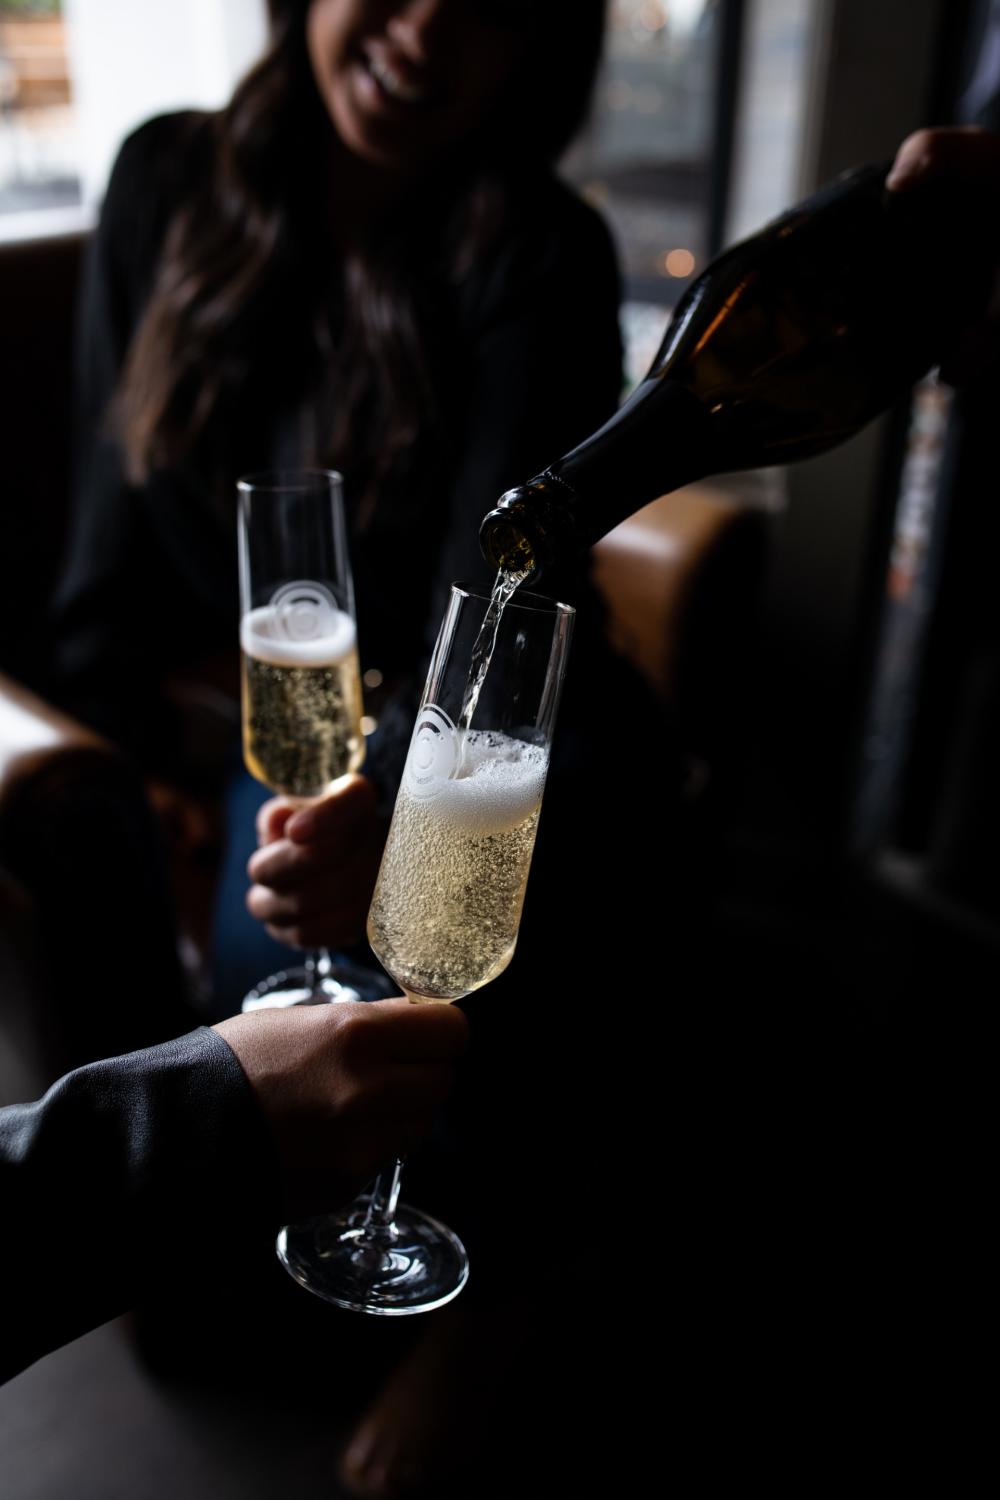 This is an image of two glasses of sparkling wine from Caraccioli Cellars in Carmel-by-the-Sea